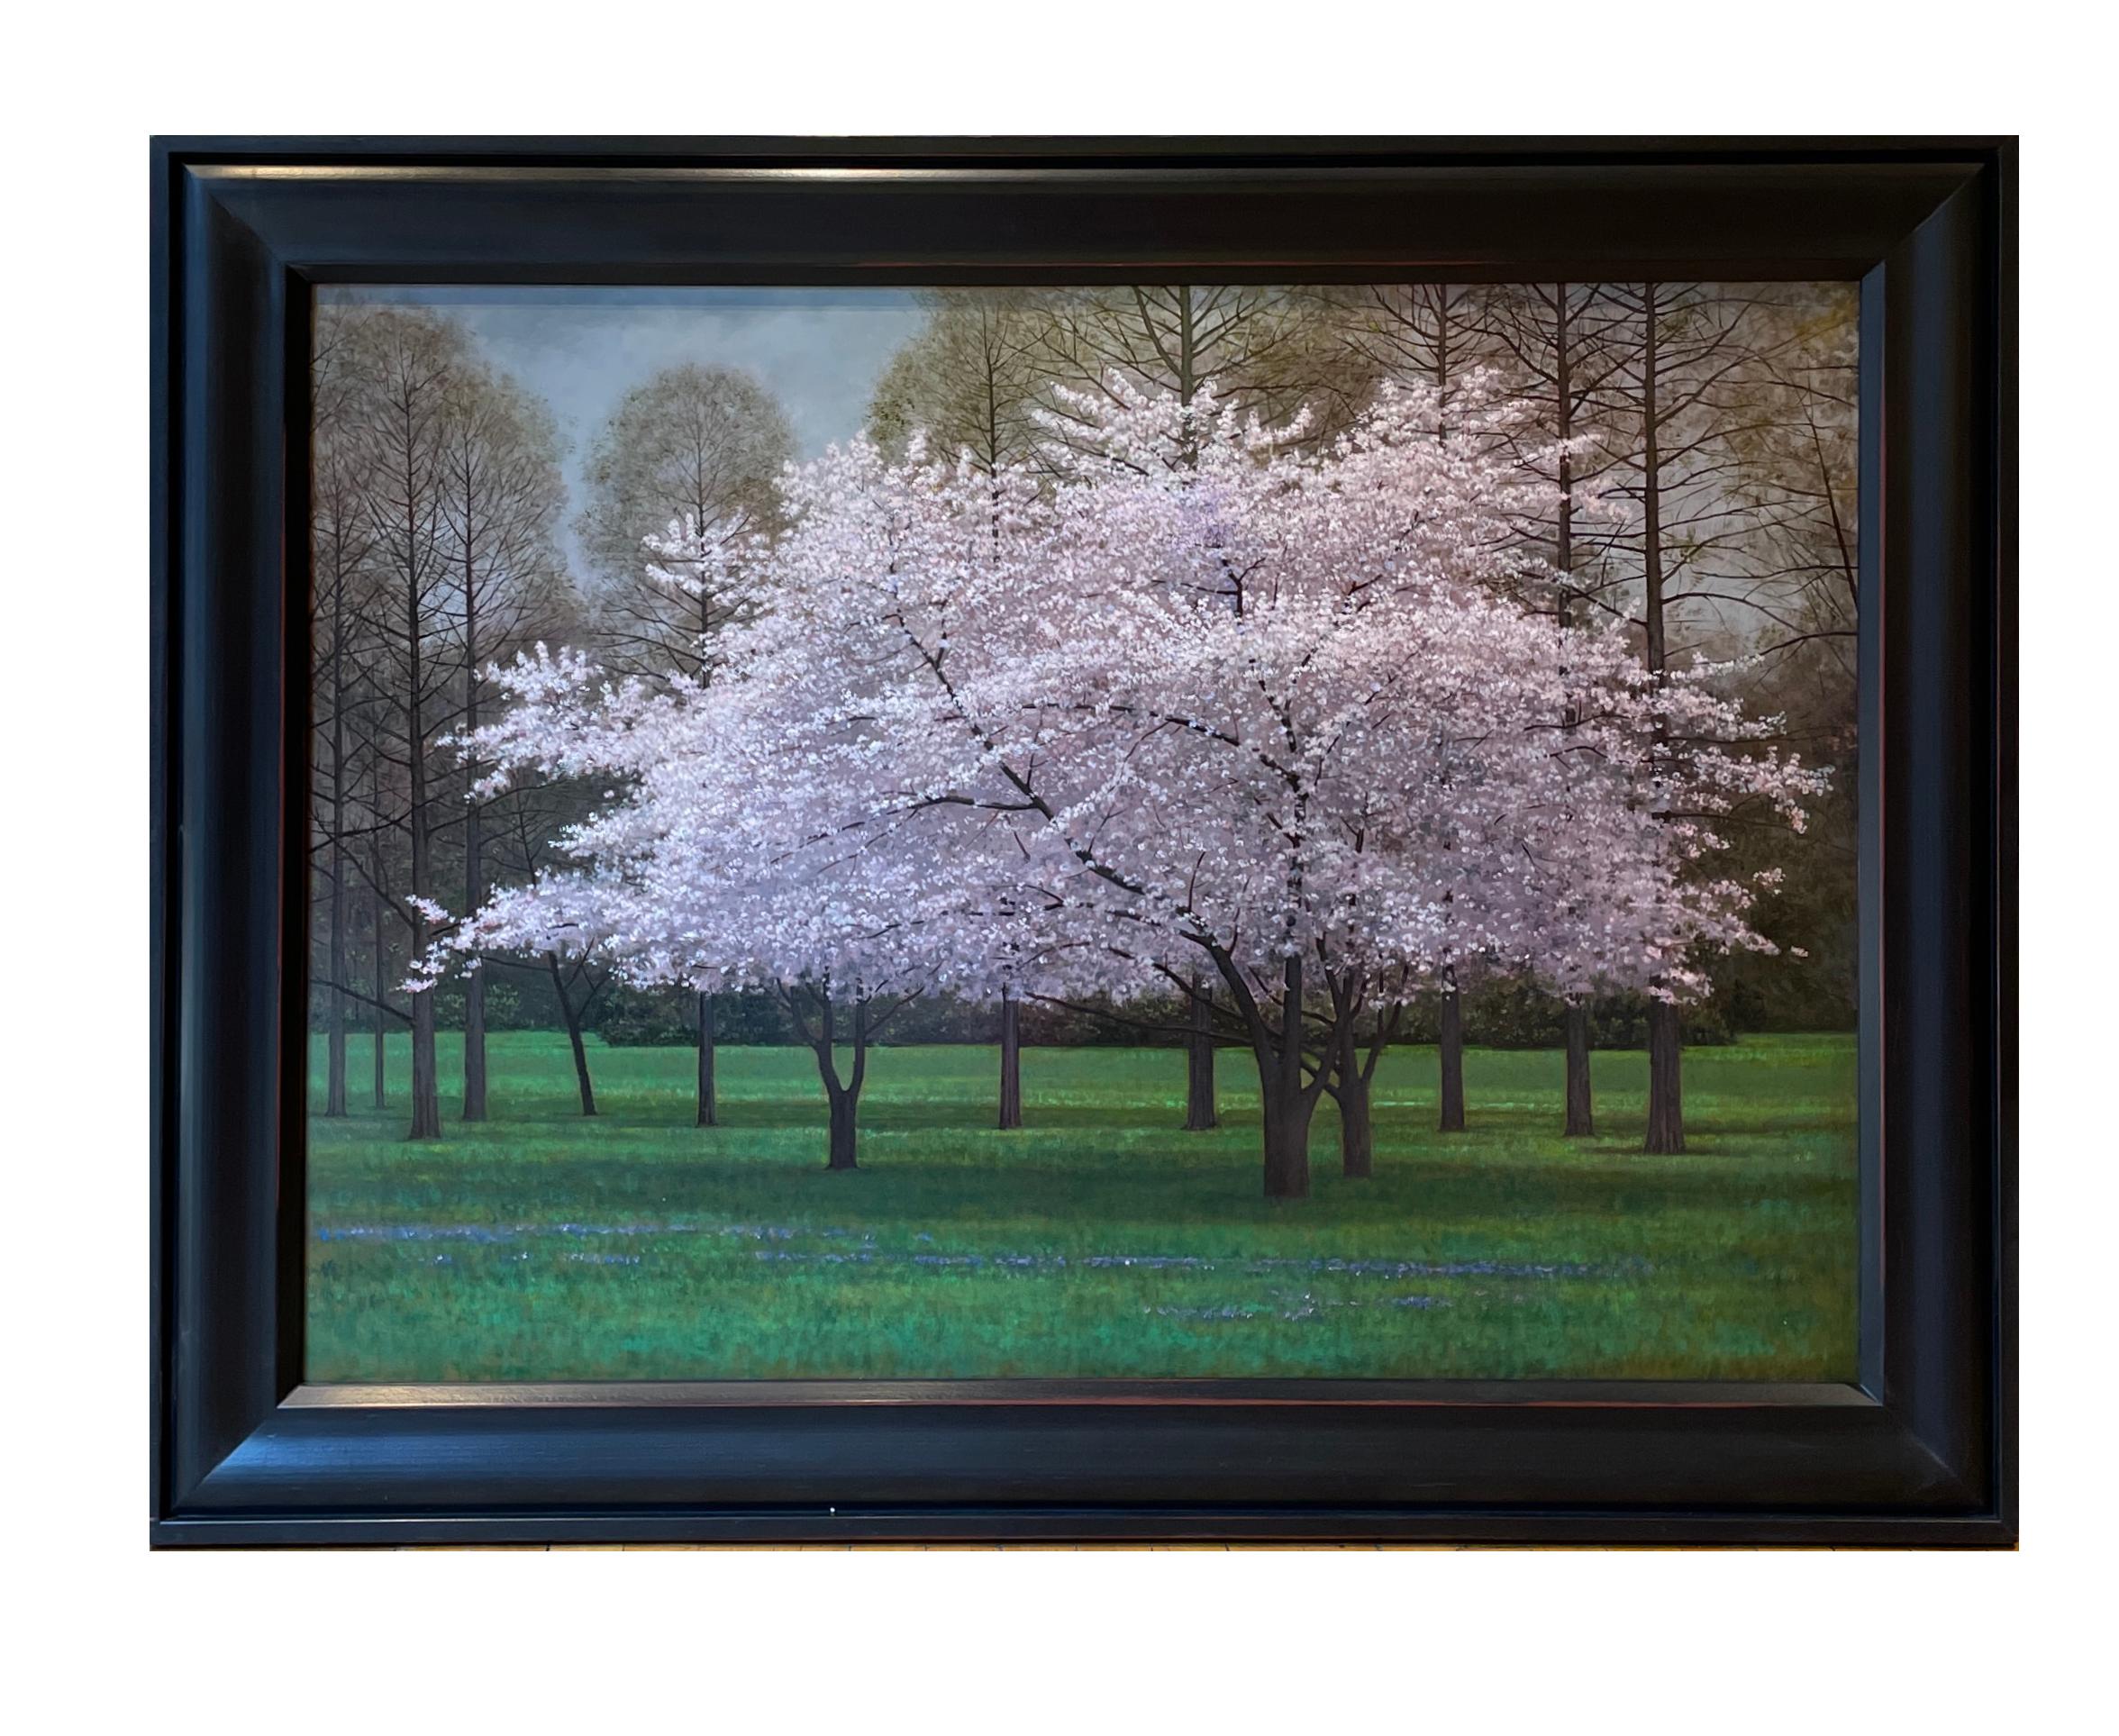 Crabapple - Spring Blooming Crabapple Tree in Green Grassy Clearing, Oil Paint - Painting by Jeff Aeling